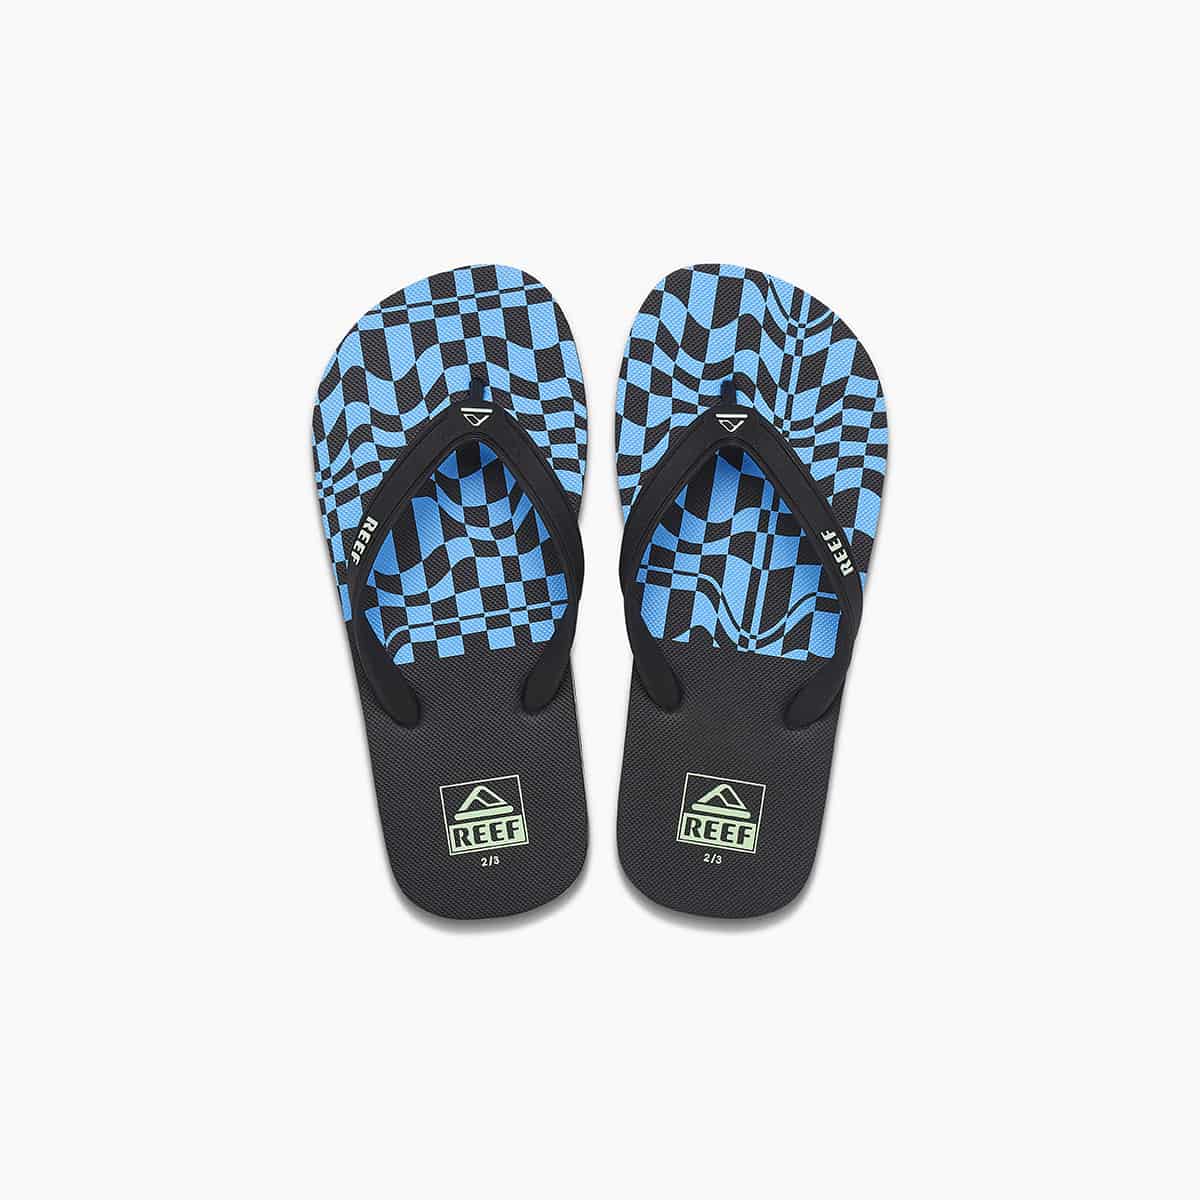 KIDS SWITCHFOOT PRINT SWELL CHECKERS